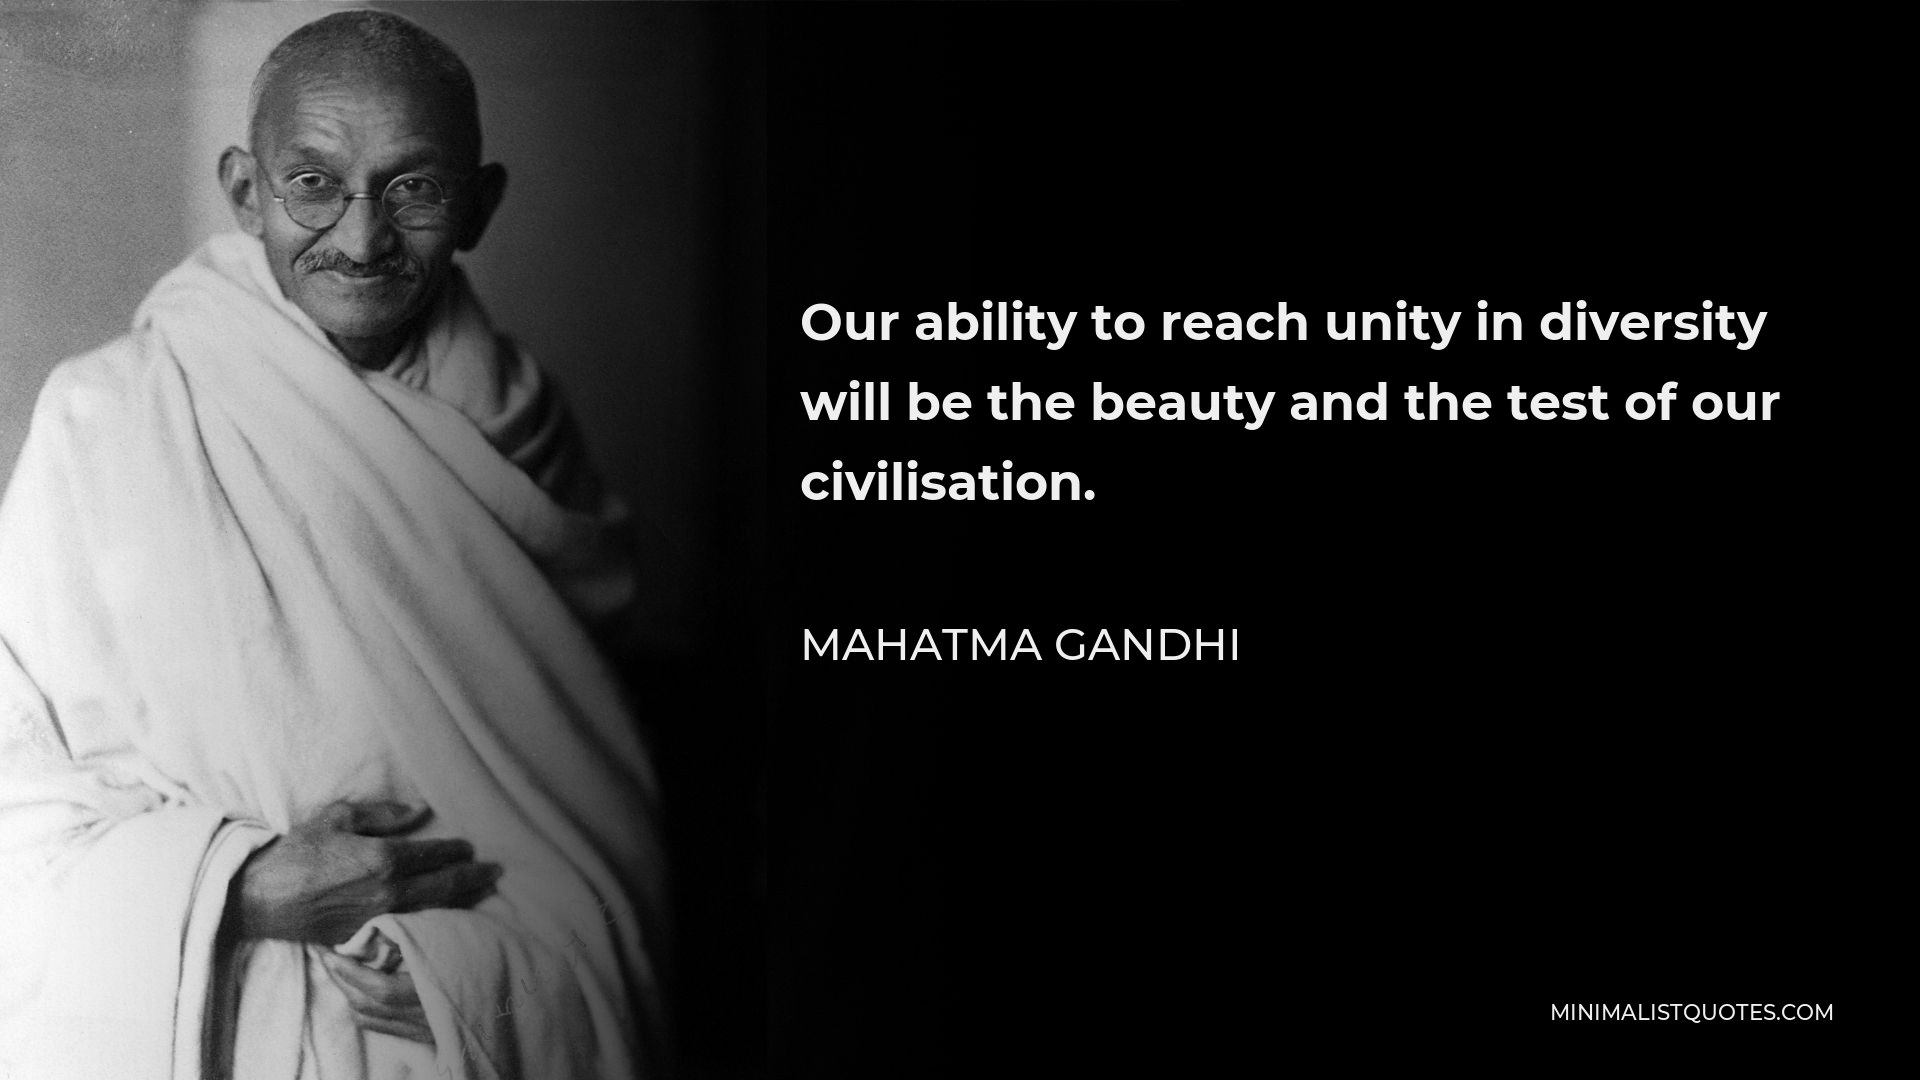 Mahatma Gandhi Quote - Our ability to reach unity in diversity will be the beauty and the test of our civilisation.